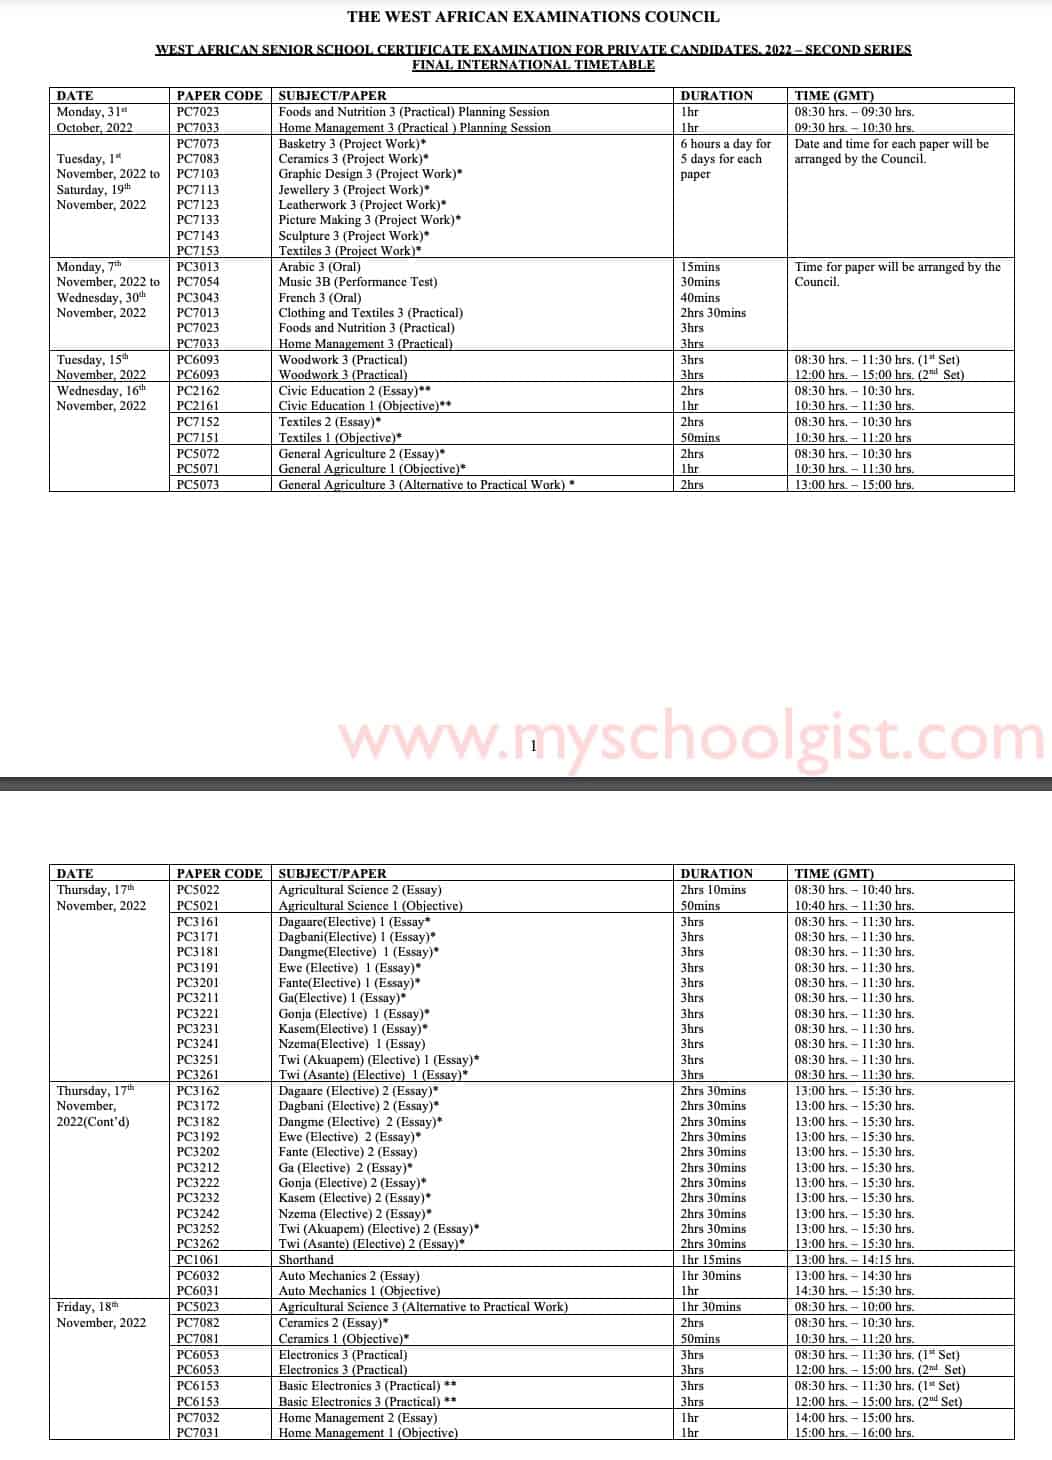 WAEC GCE TIme Table for 2nd Series 2022